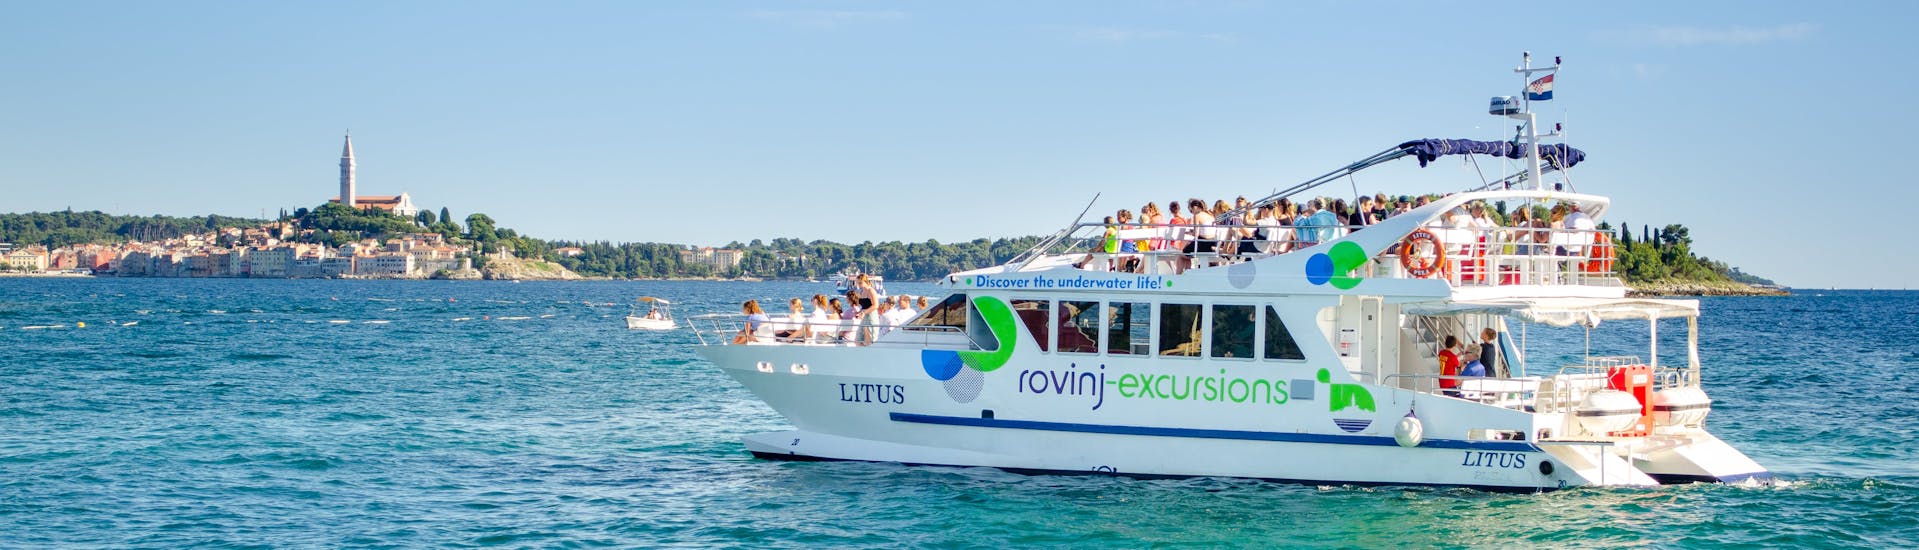 The catamaran LITUS in the crystal- clear water of Istria during the Catamaran Trip around Rovinj with Swimming Stop with Rovinj Excursions.